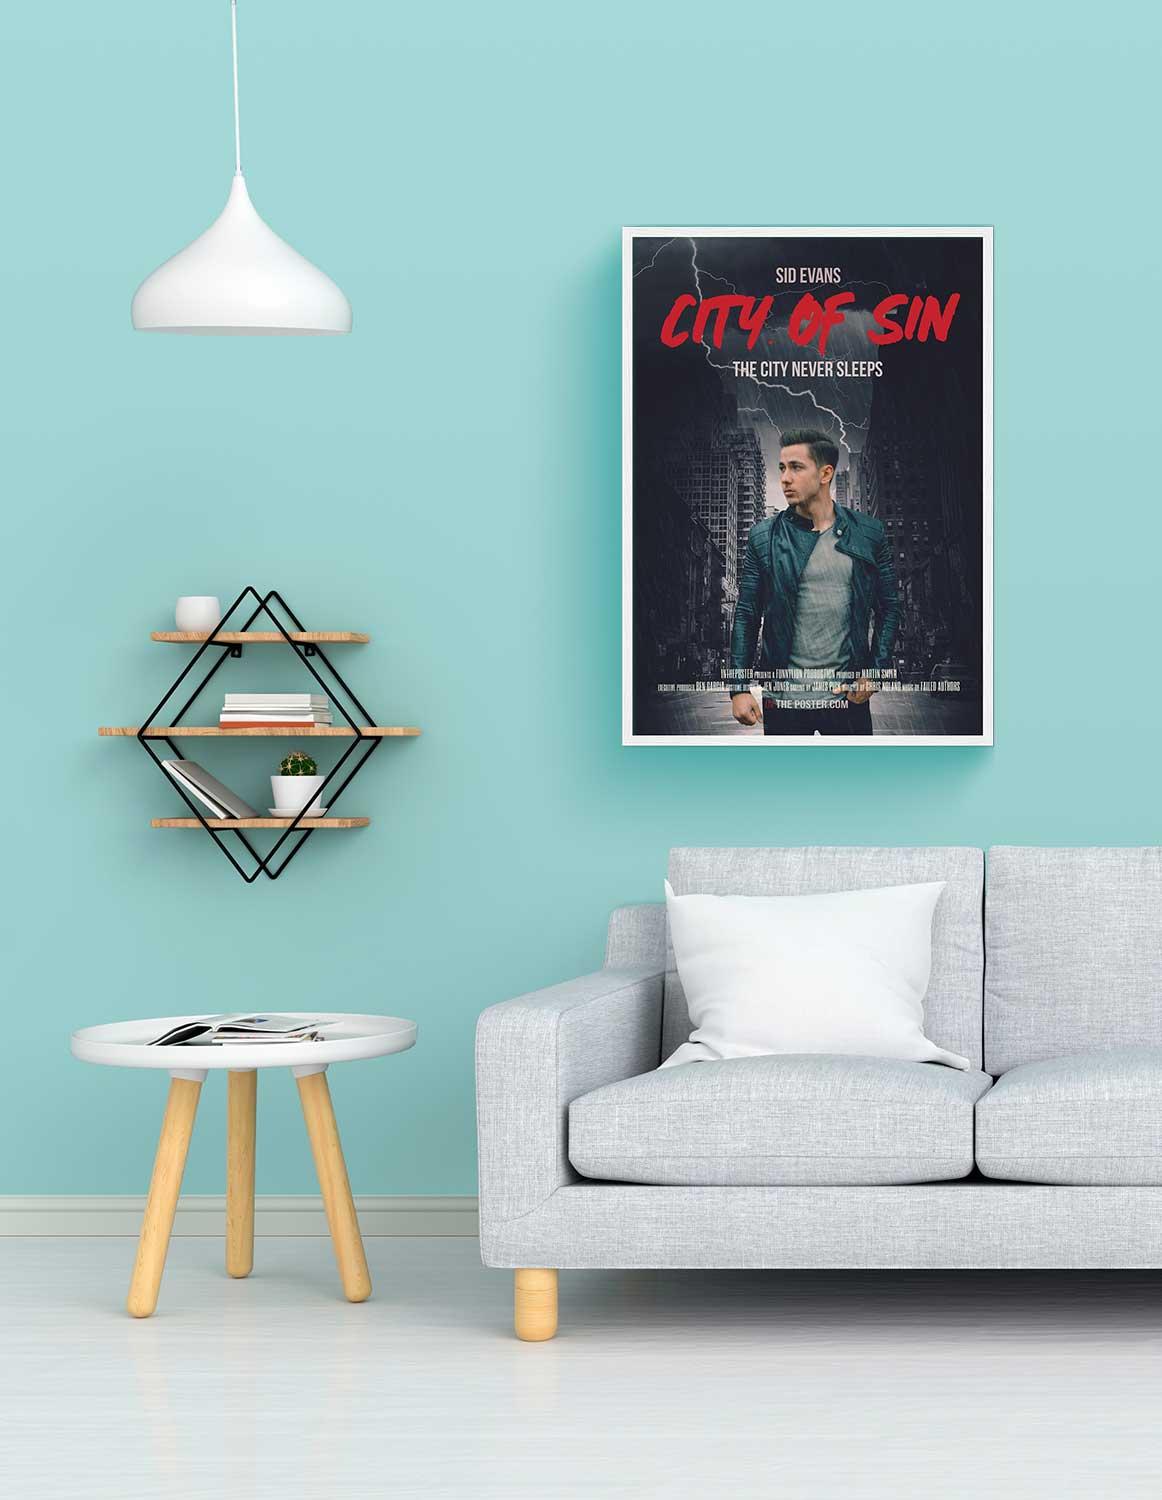 A personalized film noir movie poster in regular size in a white frame above a grey sofa